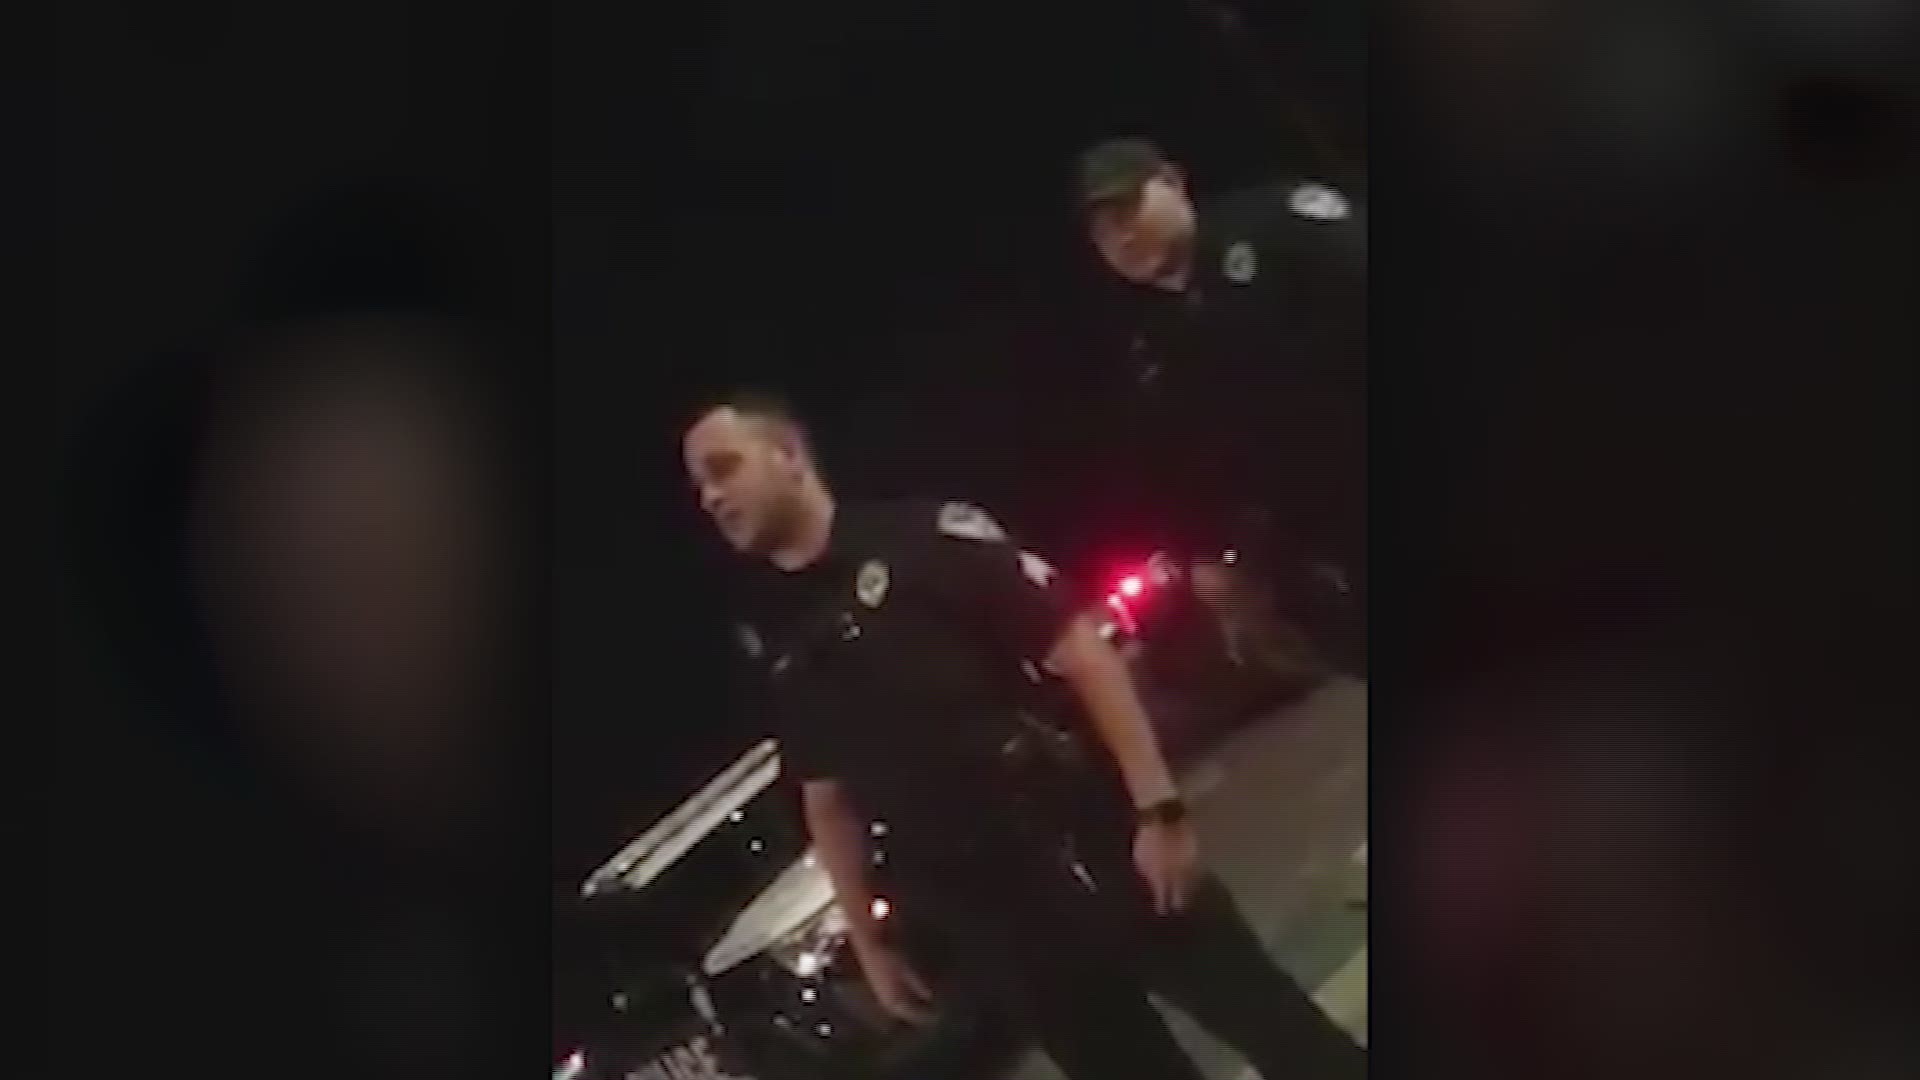 The controversial video shows African-American customers being asked to leave a Chili's parking lot by police after dining at the restaurant.